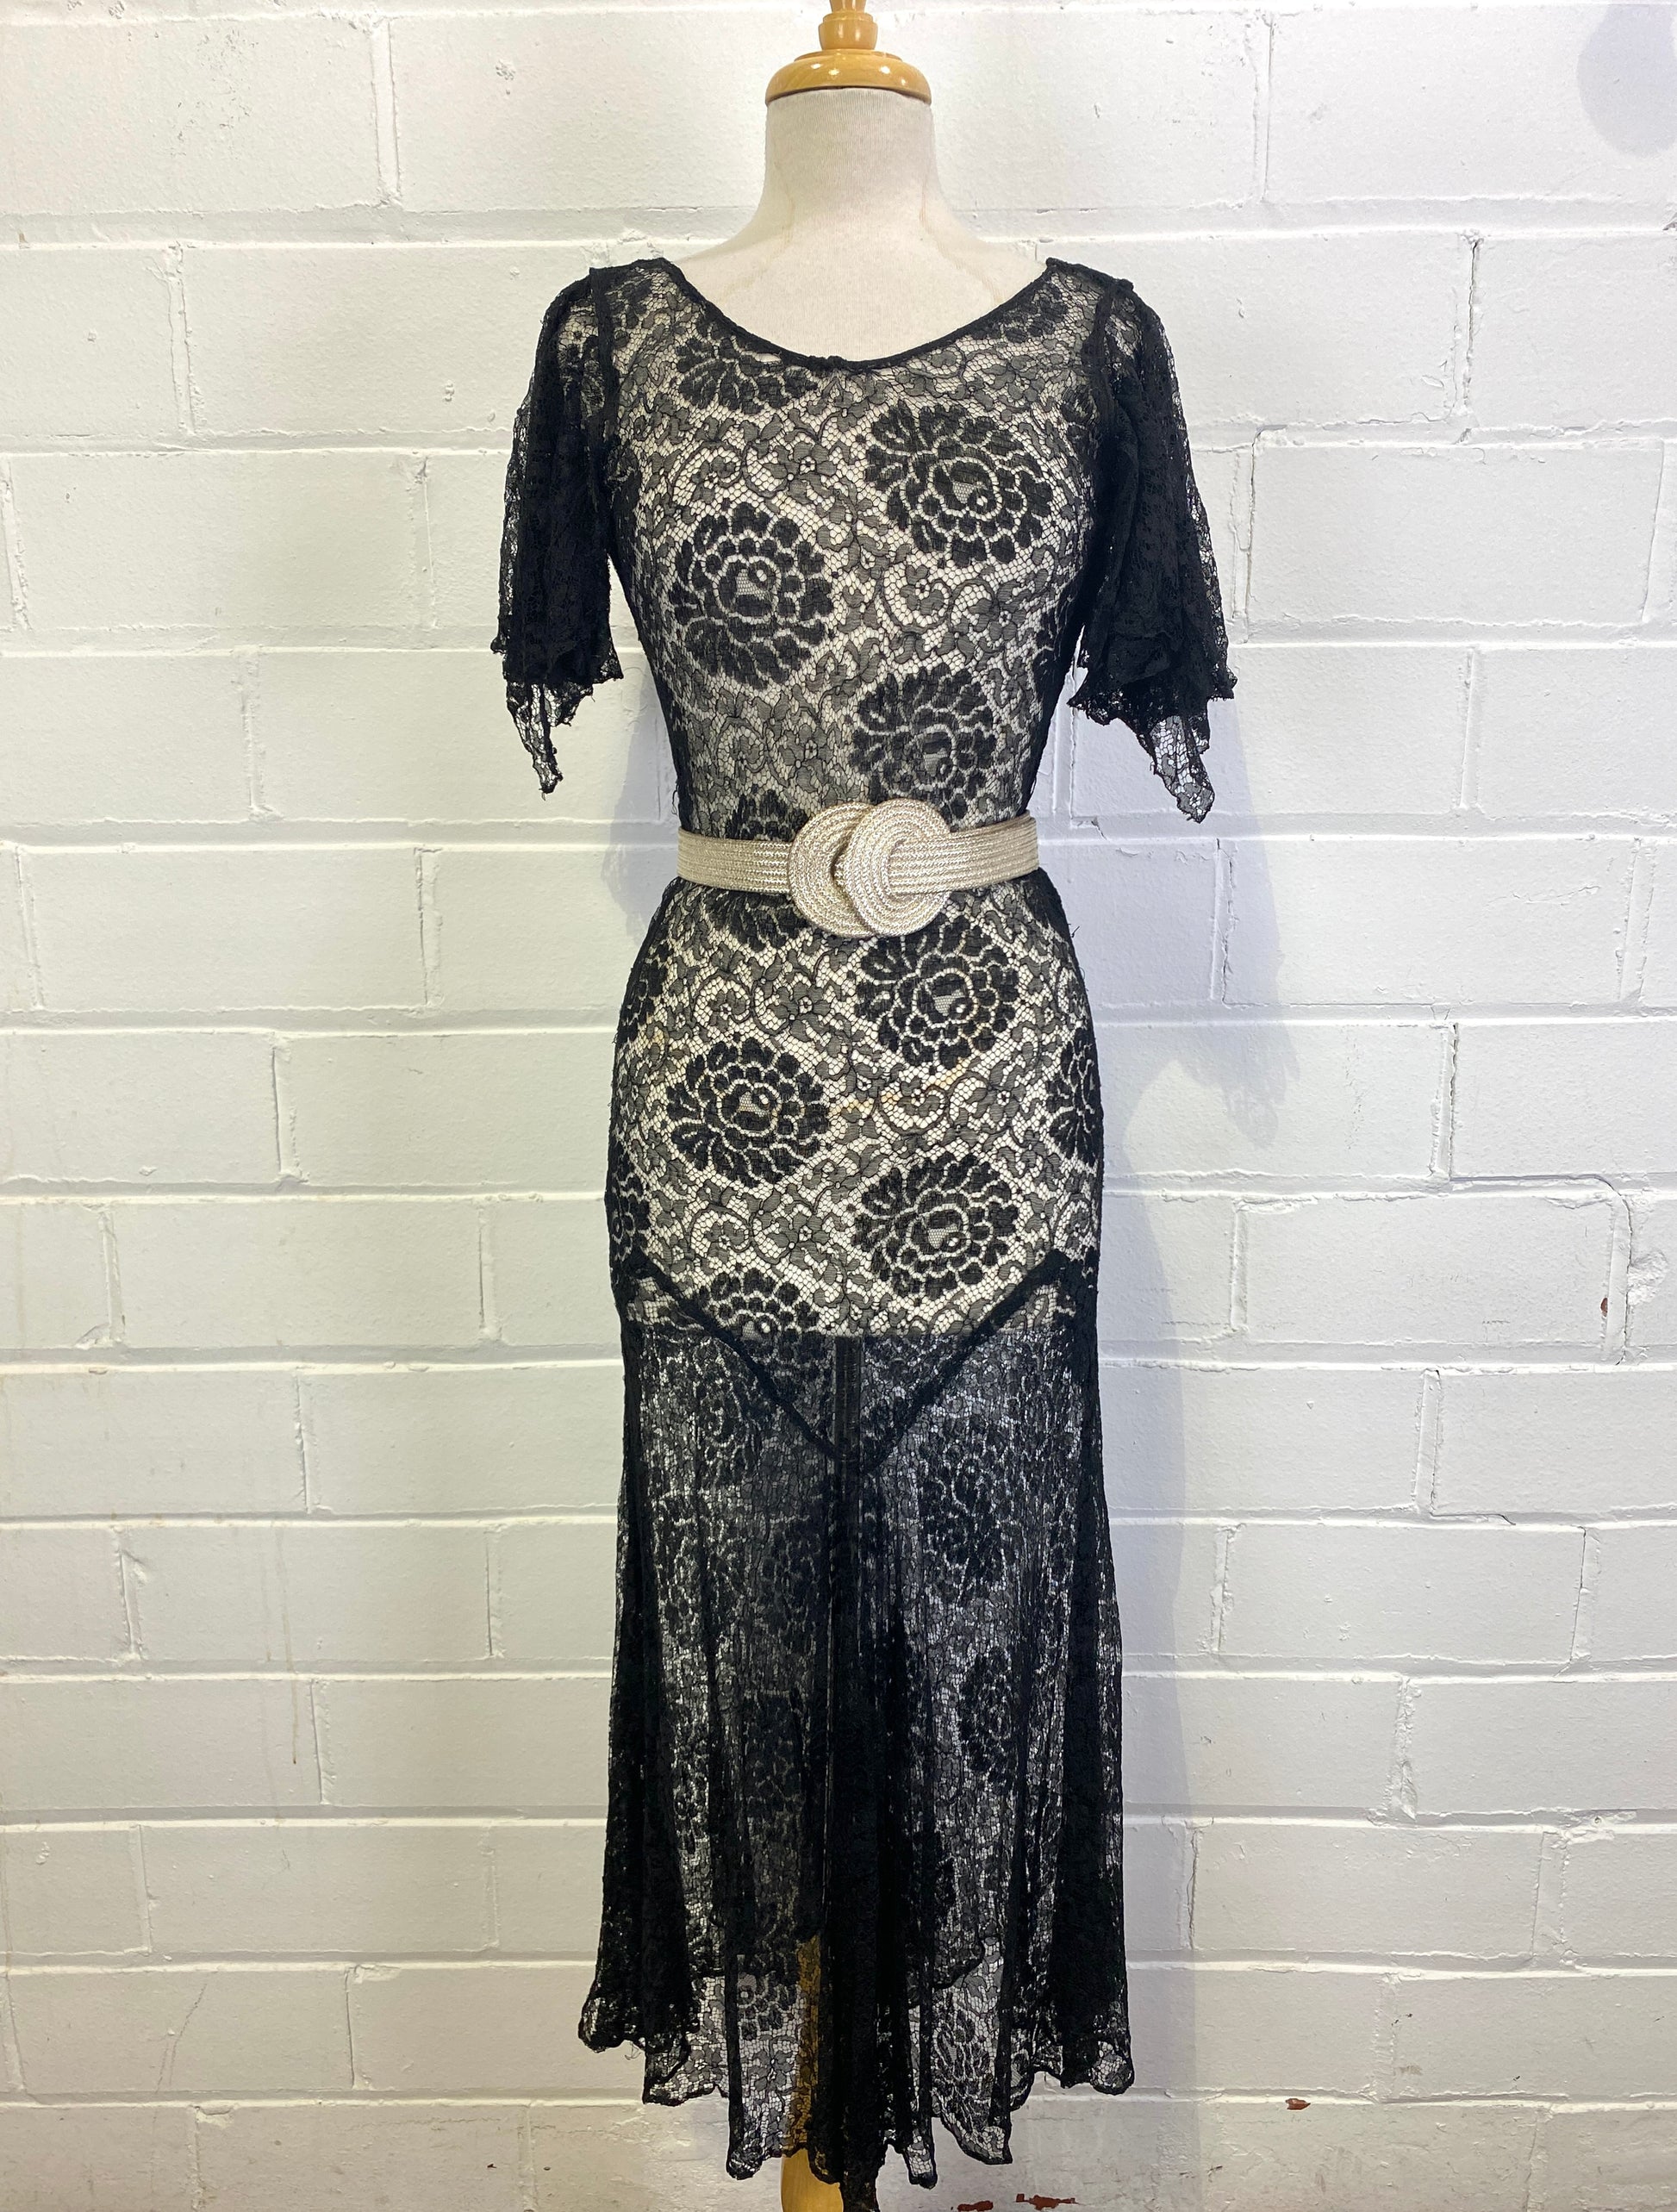 Vintage 1930s Black Lace Dress, Small butterfly sleeves and handkerchief hem, sheer black lace 